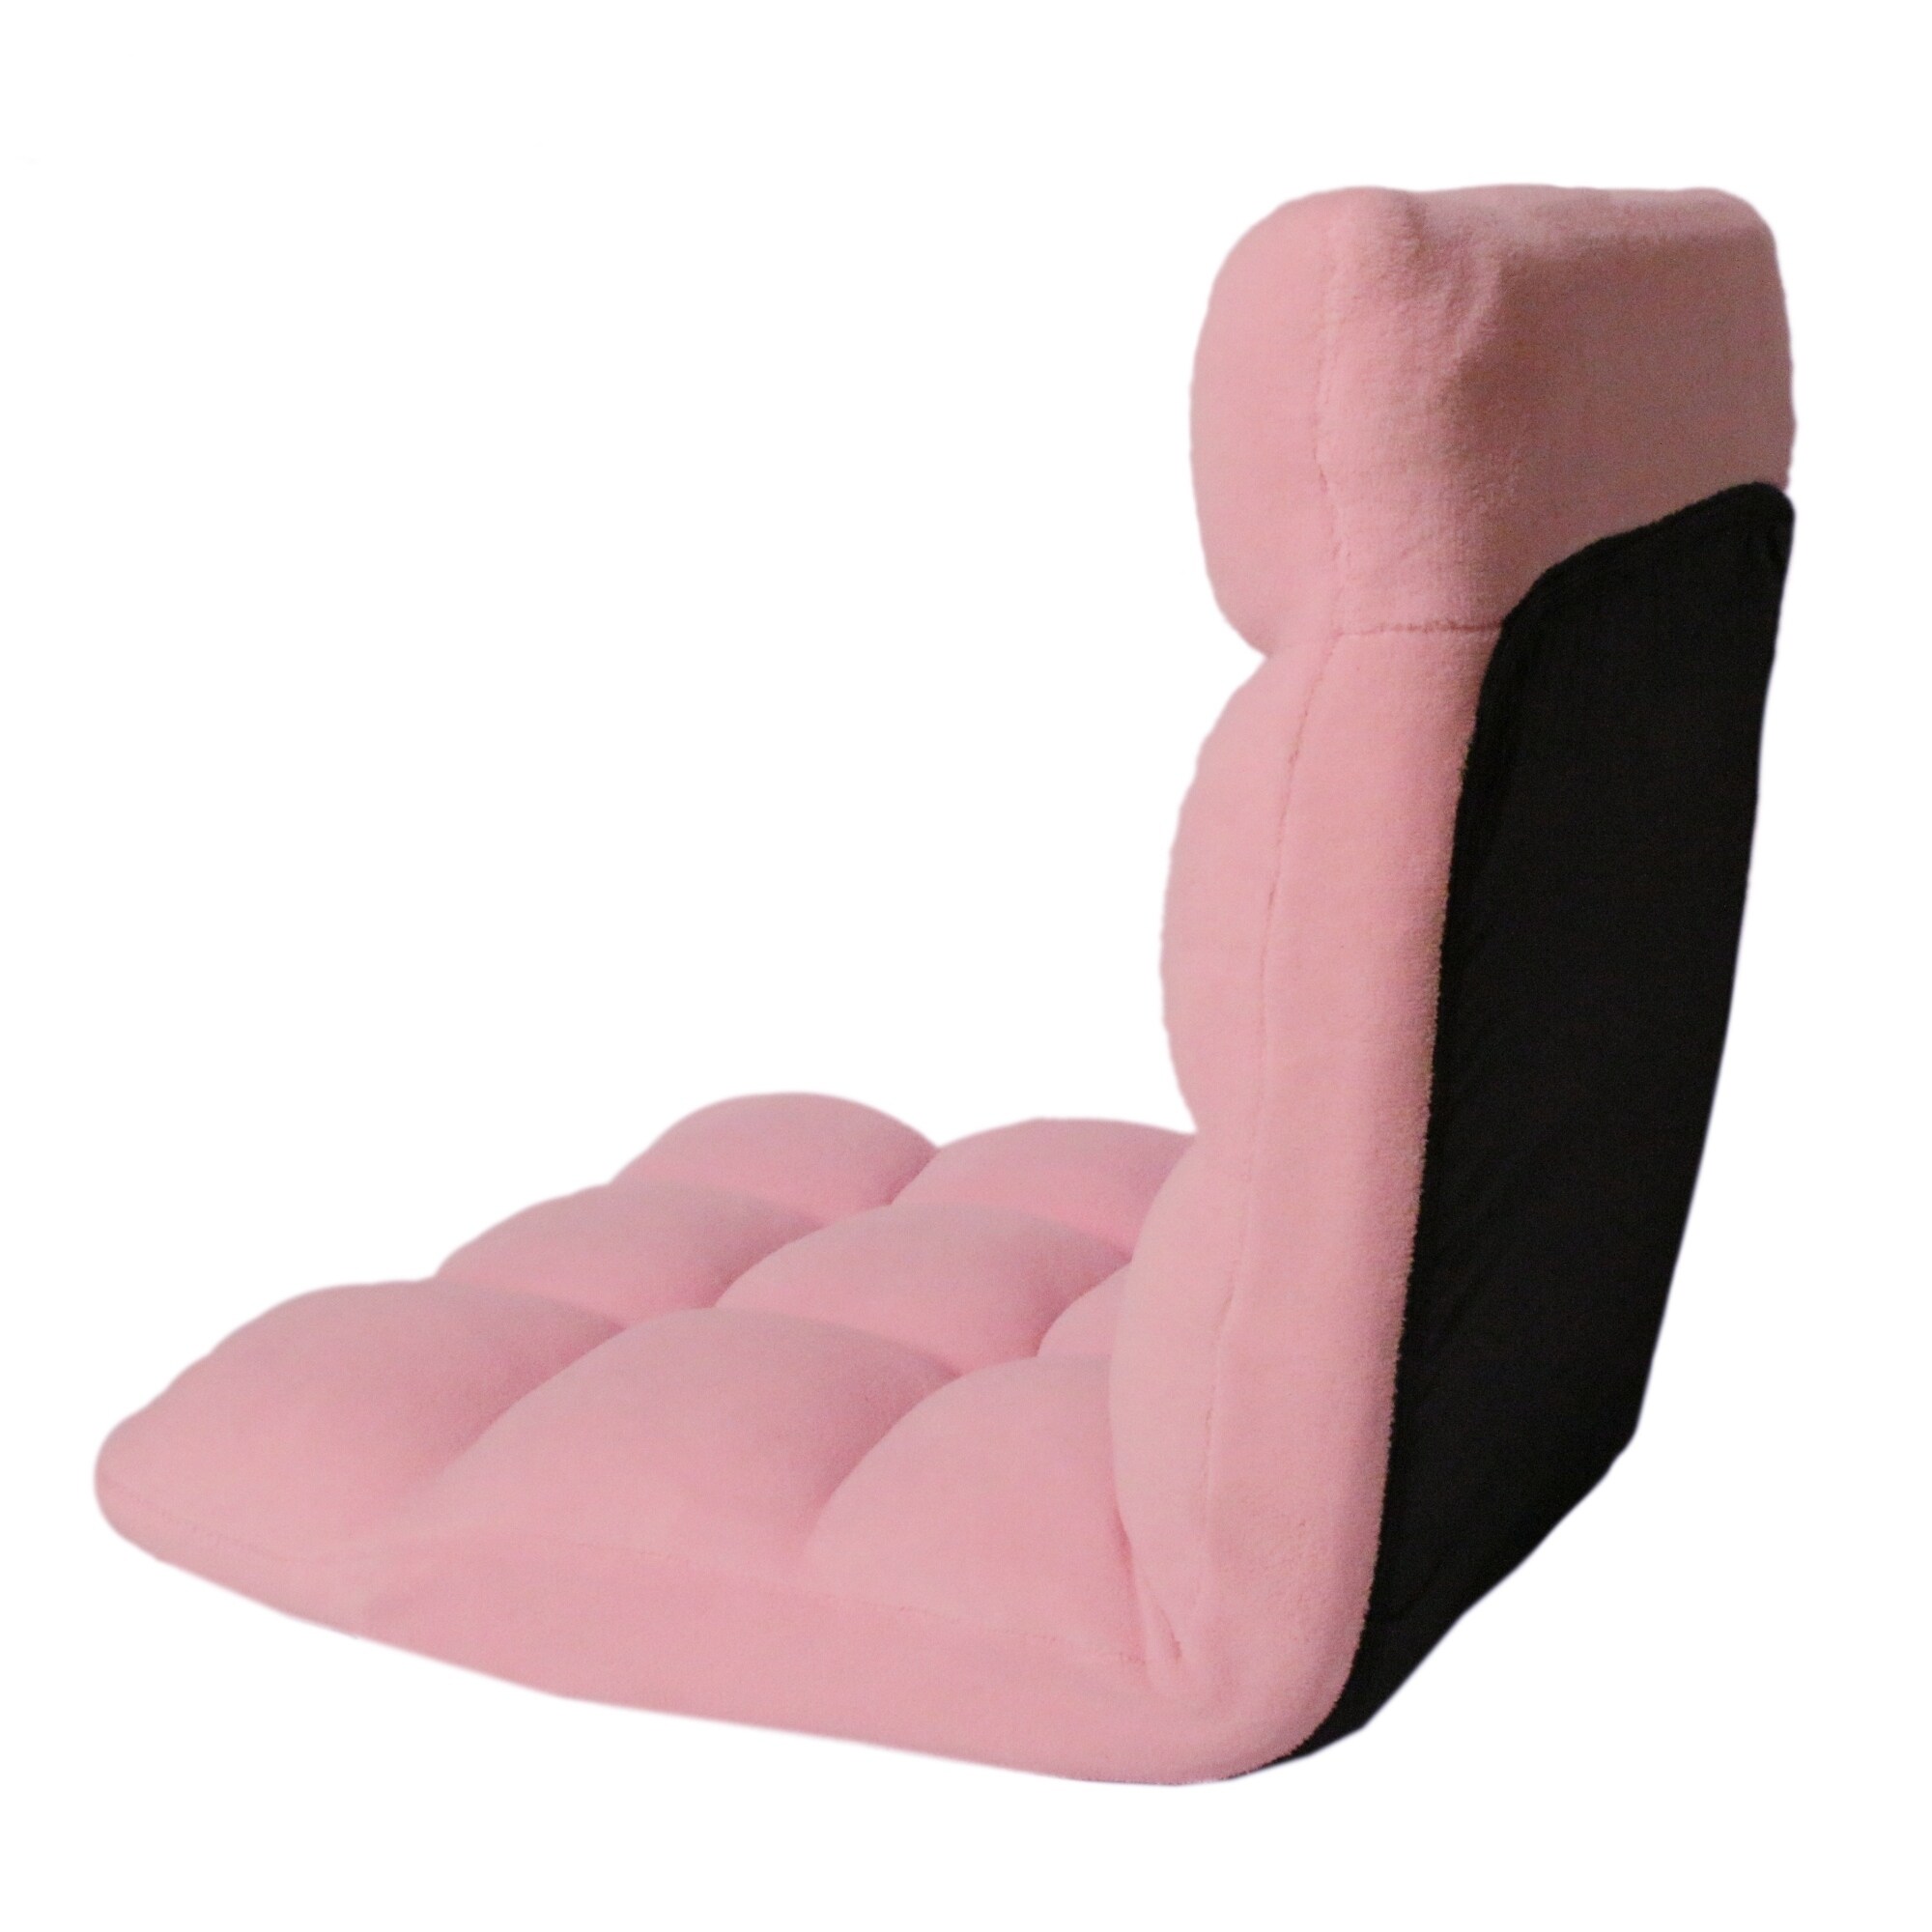 Tangkula Adjustable 14-position Floor Chair ,padded Gaming Chair Lazy  Recliner Pink : Target